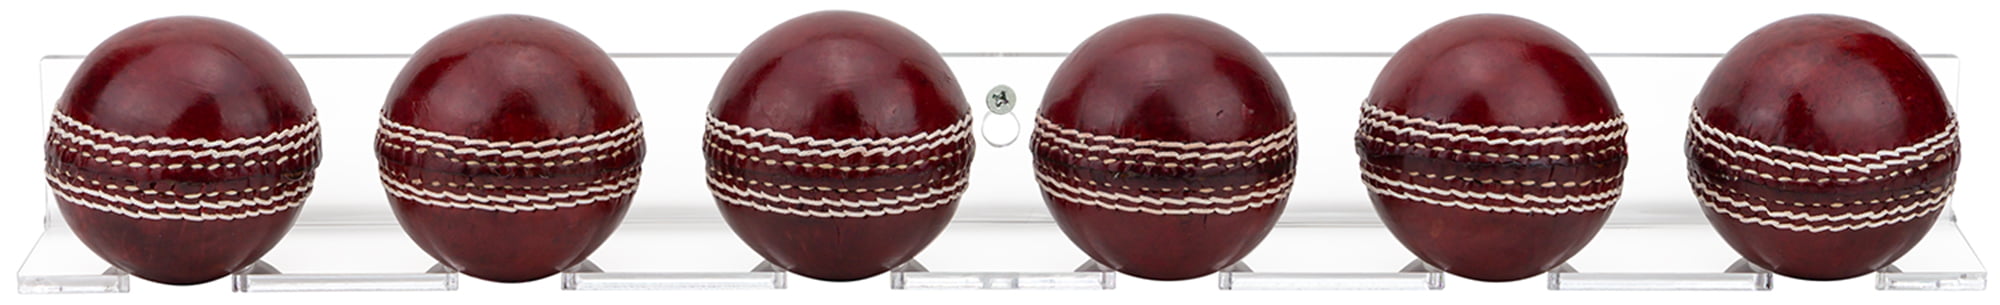 Better Display Cases Clear Acrylic Cricket Balls Wall Mounted Floating Shelf Bracket for 6 Cricket Balls A065A 